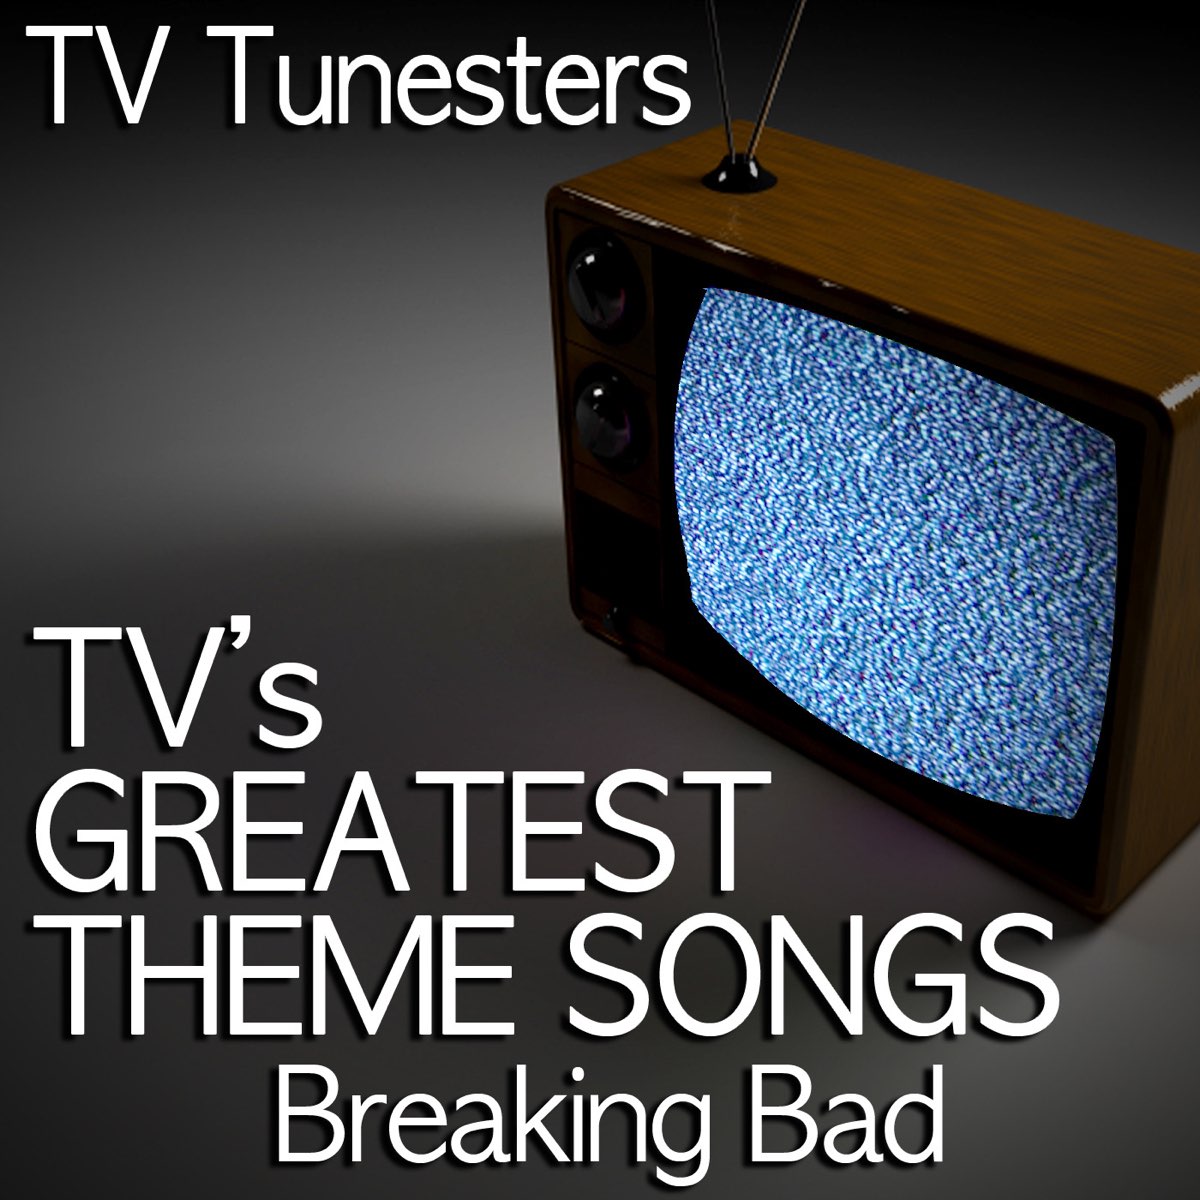 Breaking Bad (End Credits Theme) - Single by TV Tunesters on Apple Music